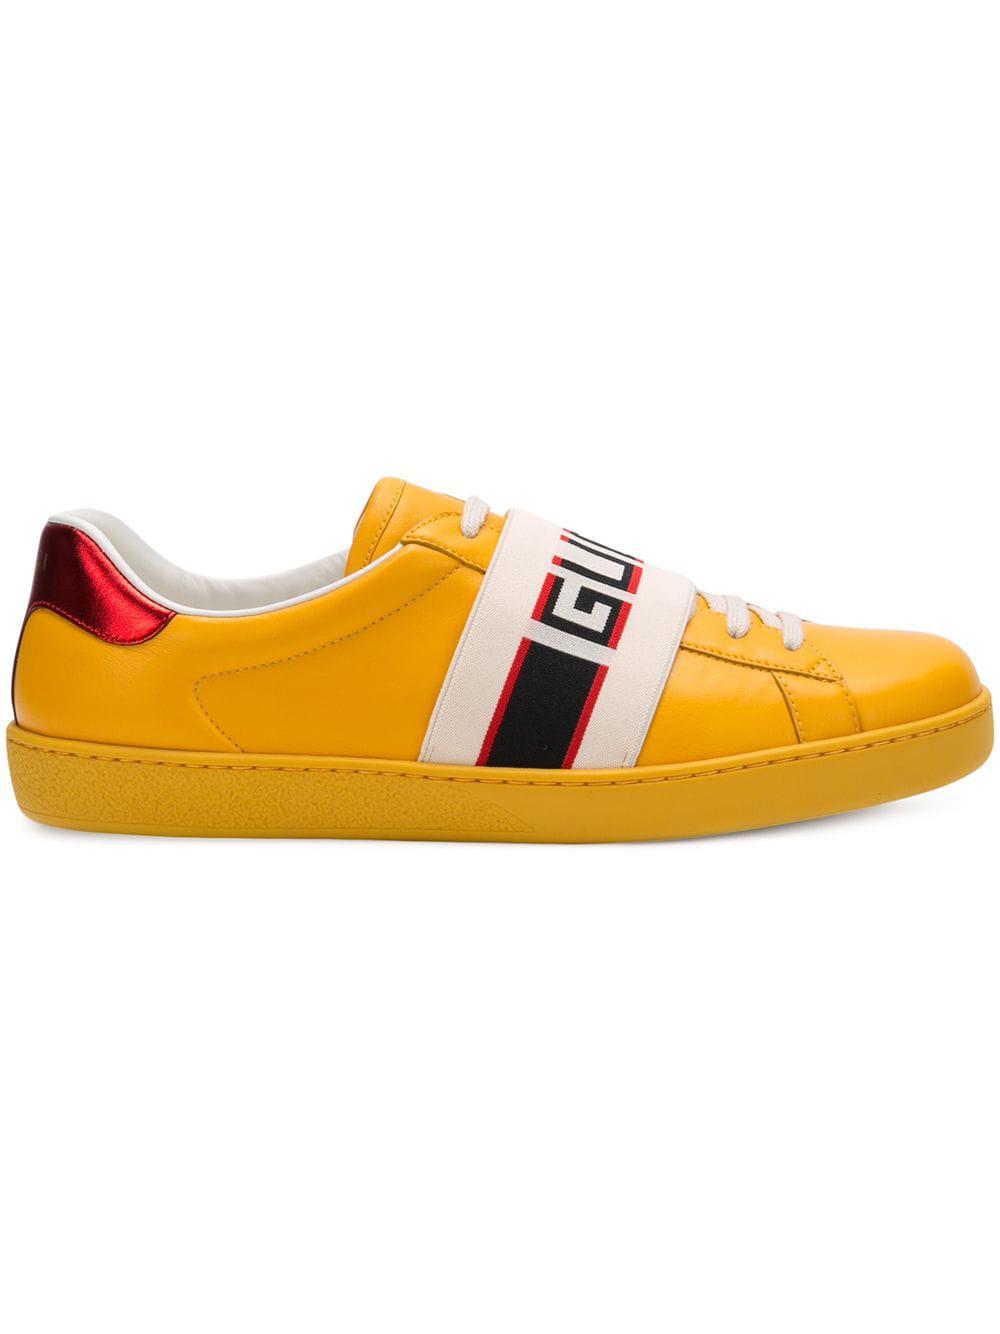 Gucci Leather Yellow New Ace Elastic 